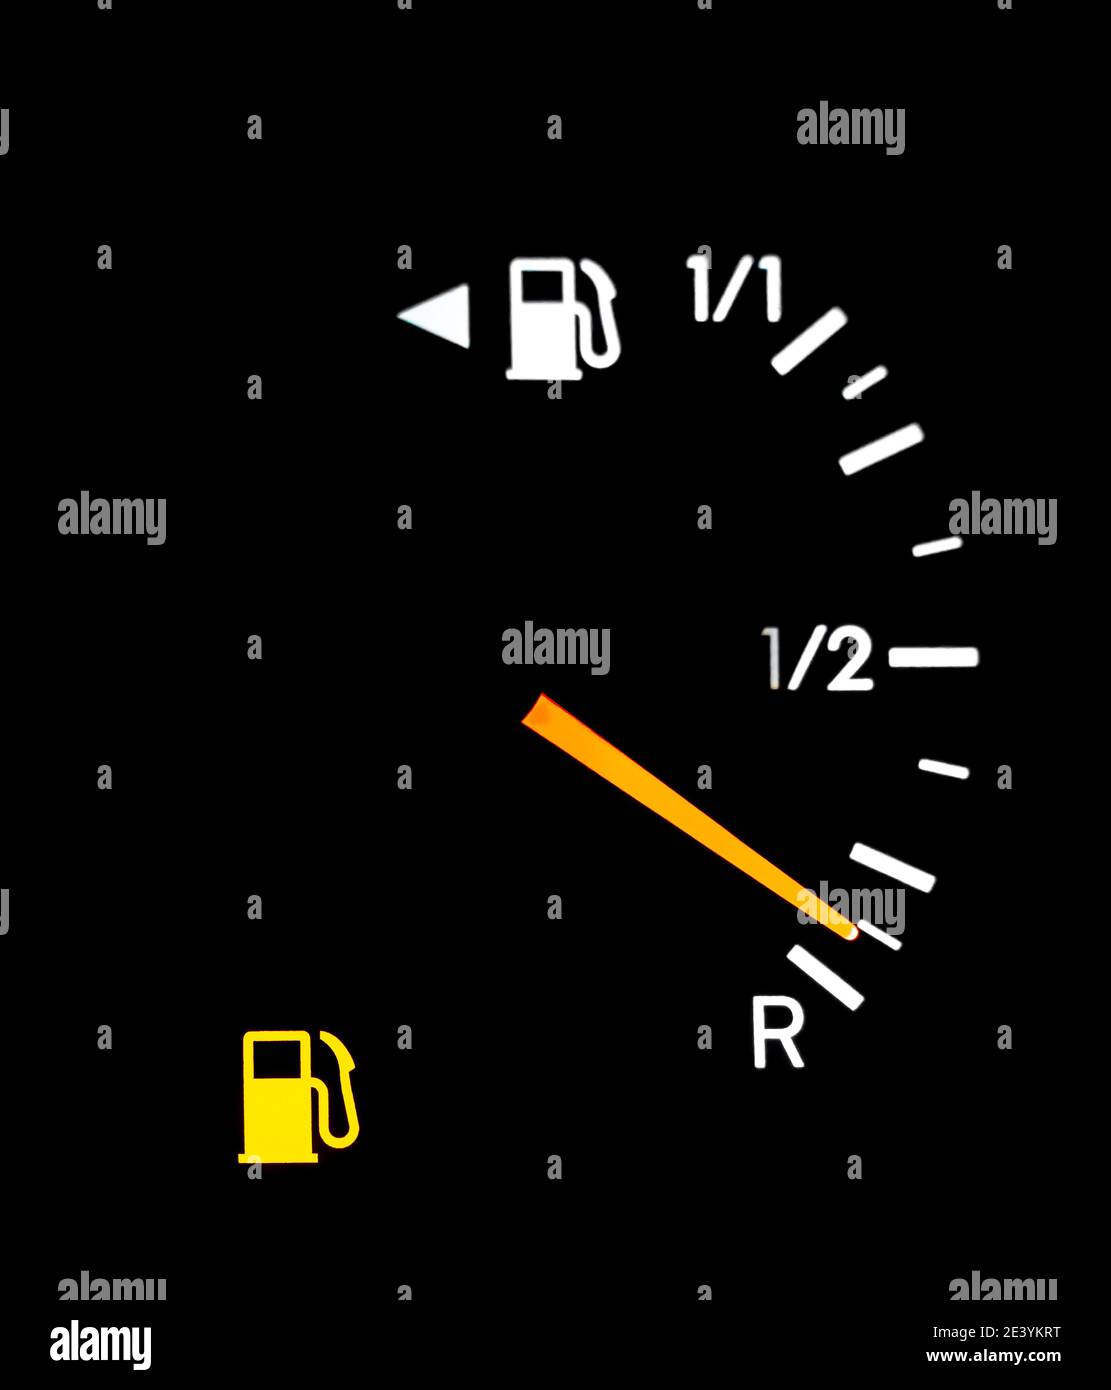 Fuel indicator on a cars dashboard showing no gas in tank. Stock Photo